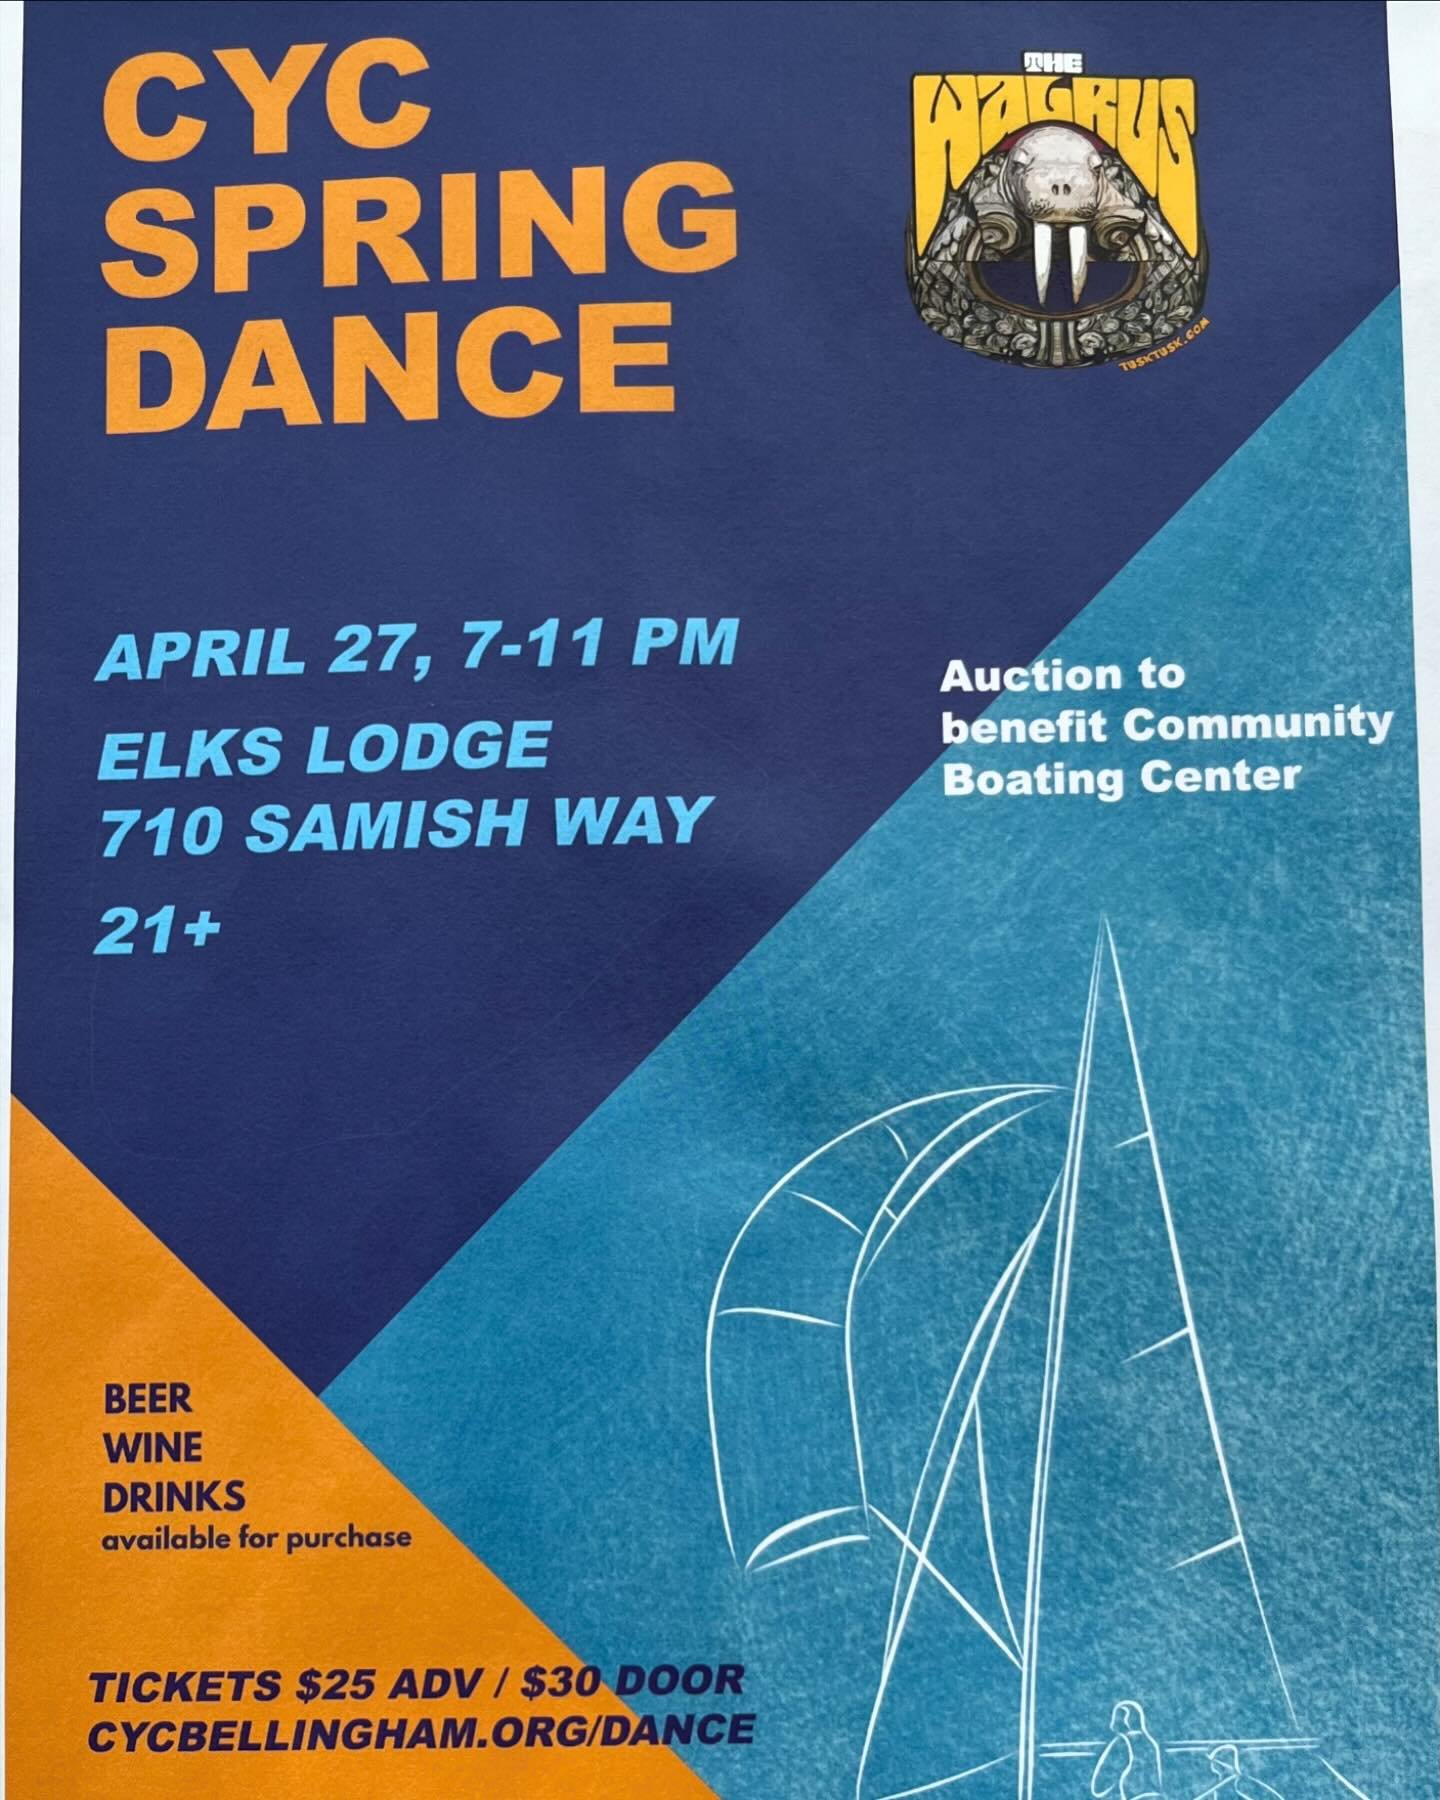 Get ready to boogie with The Walrus 🎶 

The Corinthian Yacht Club is hosting a spring dance and auction! Proceeds from the paddle auction will benefit us here at the CBC! Thank you CYC!
Last chance to get your tickets for $25. They will be $30 at th